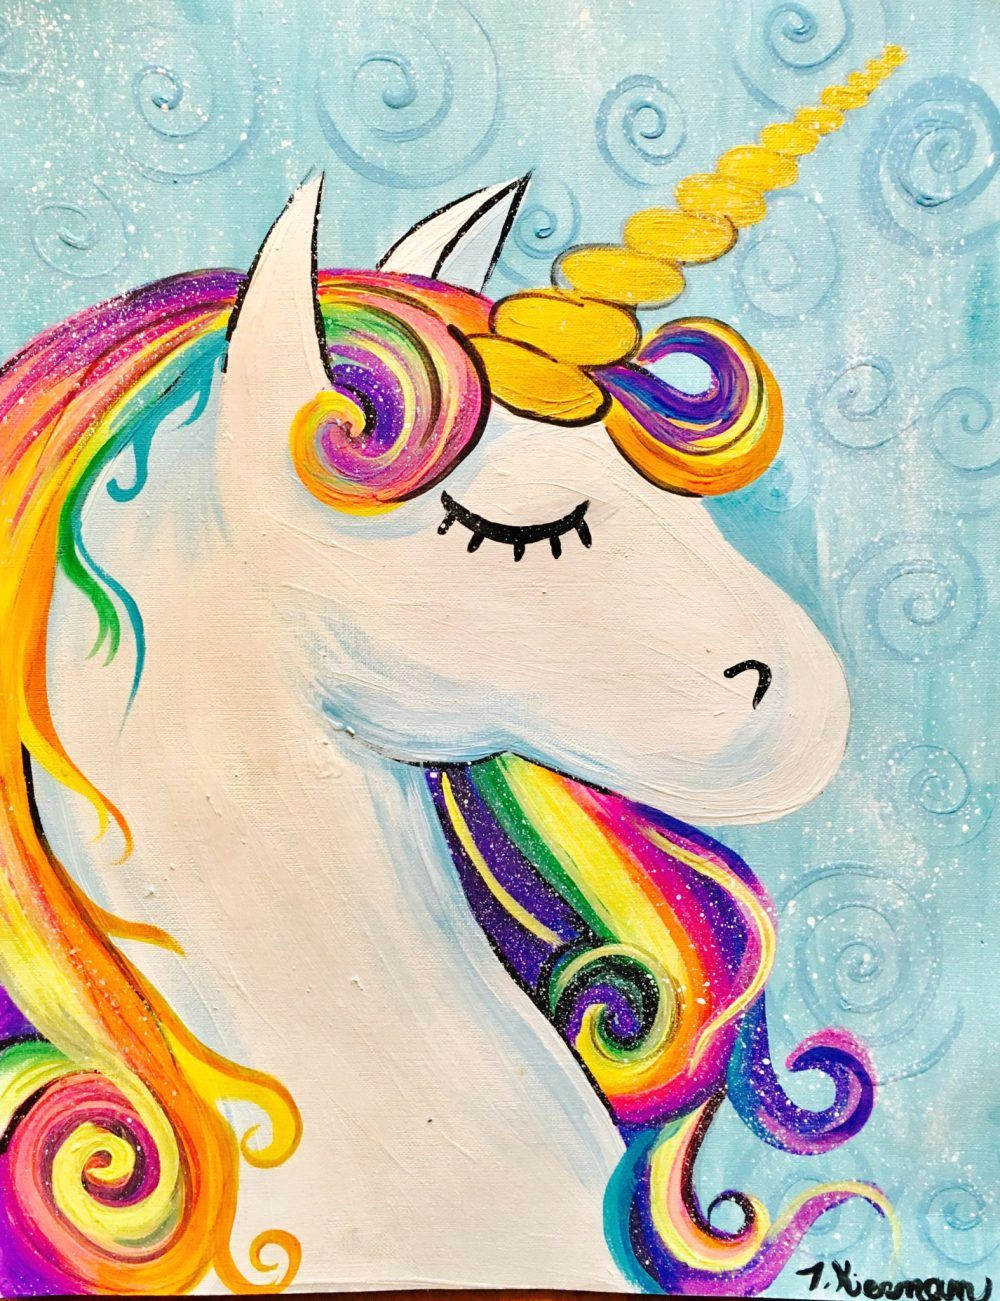 learn how to draw and paint a unicorn head step by step with this tracie s acrylic painting tutorial easy simple and fun directions with pictures and a